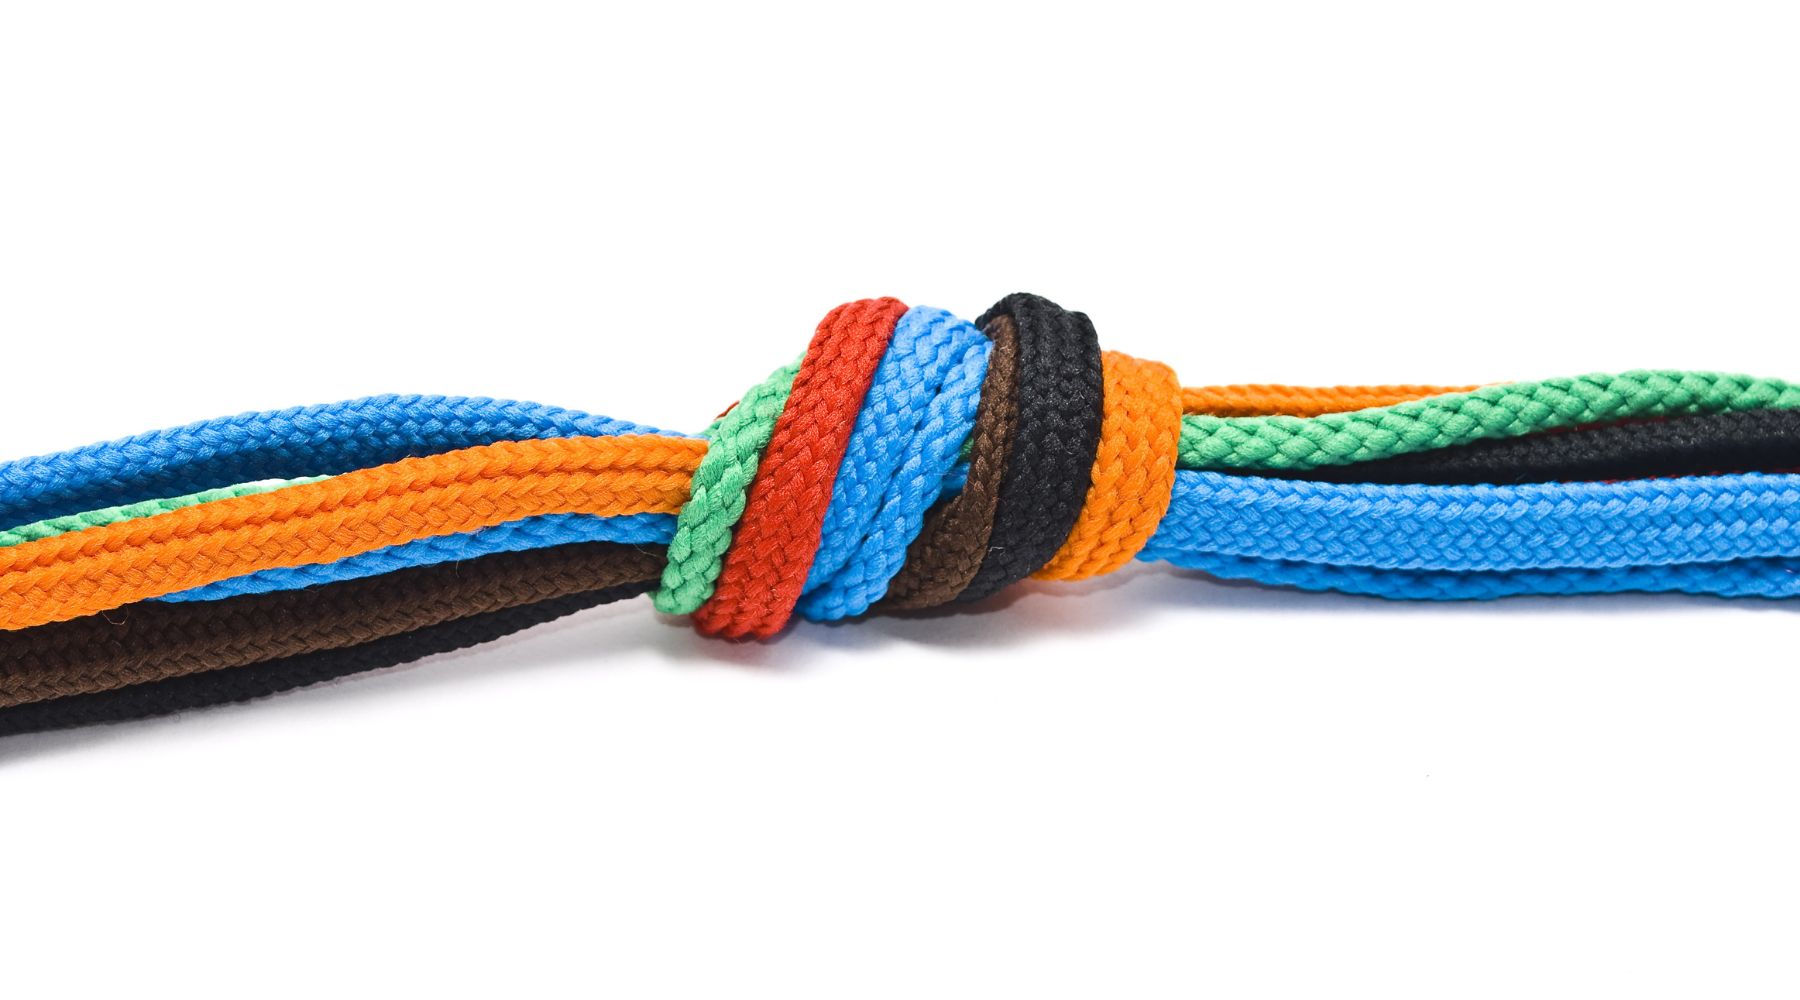 Stylish Twisted Rope Shoelaces For Fashion And Efficiency 